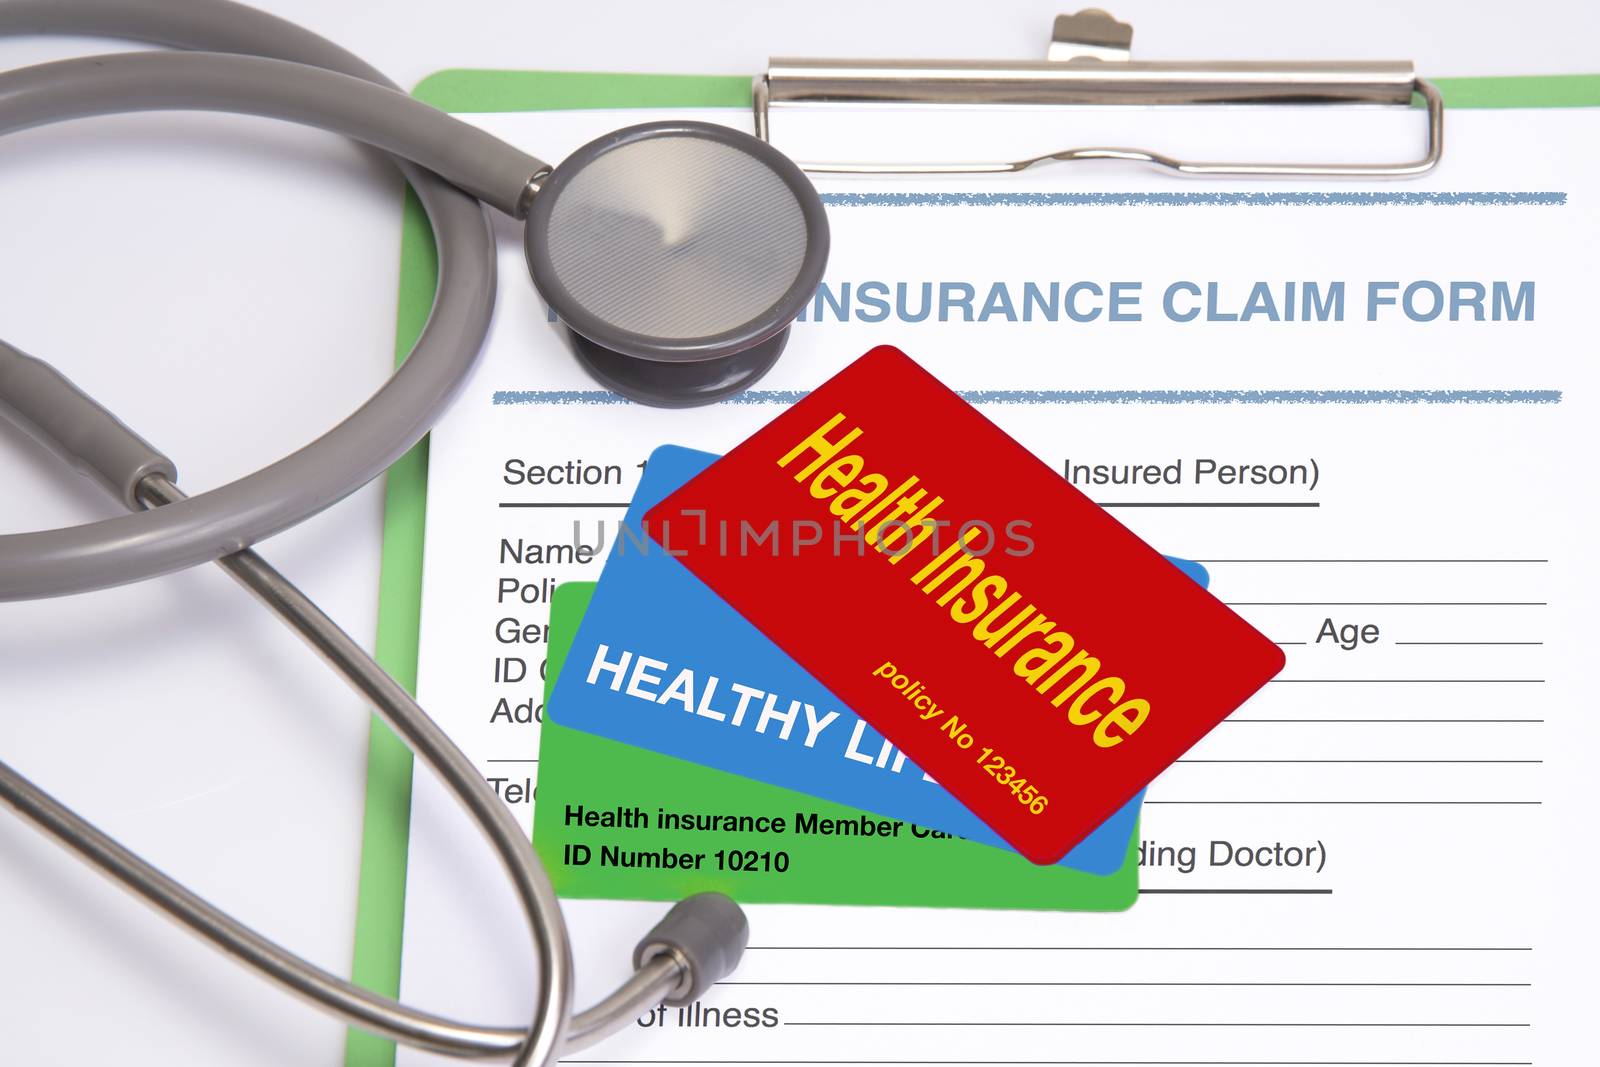 Various health insurance cards lay on insurance claim form.